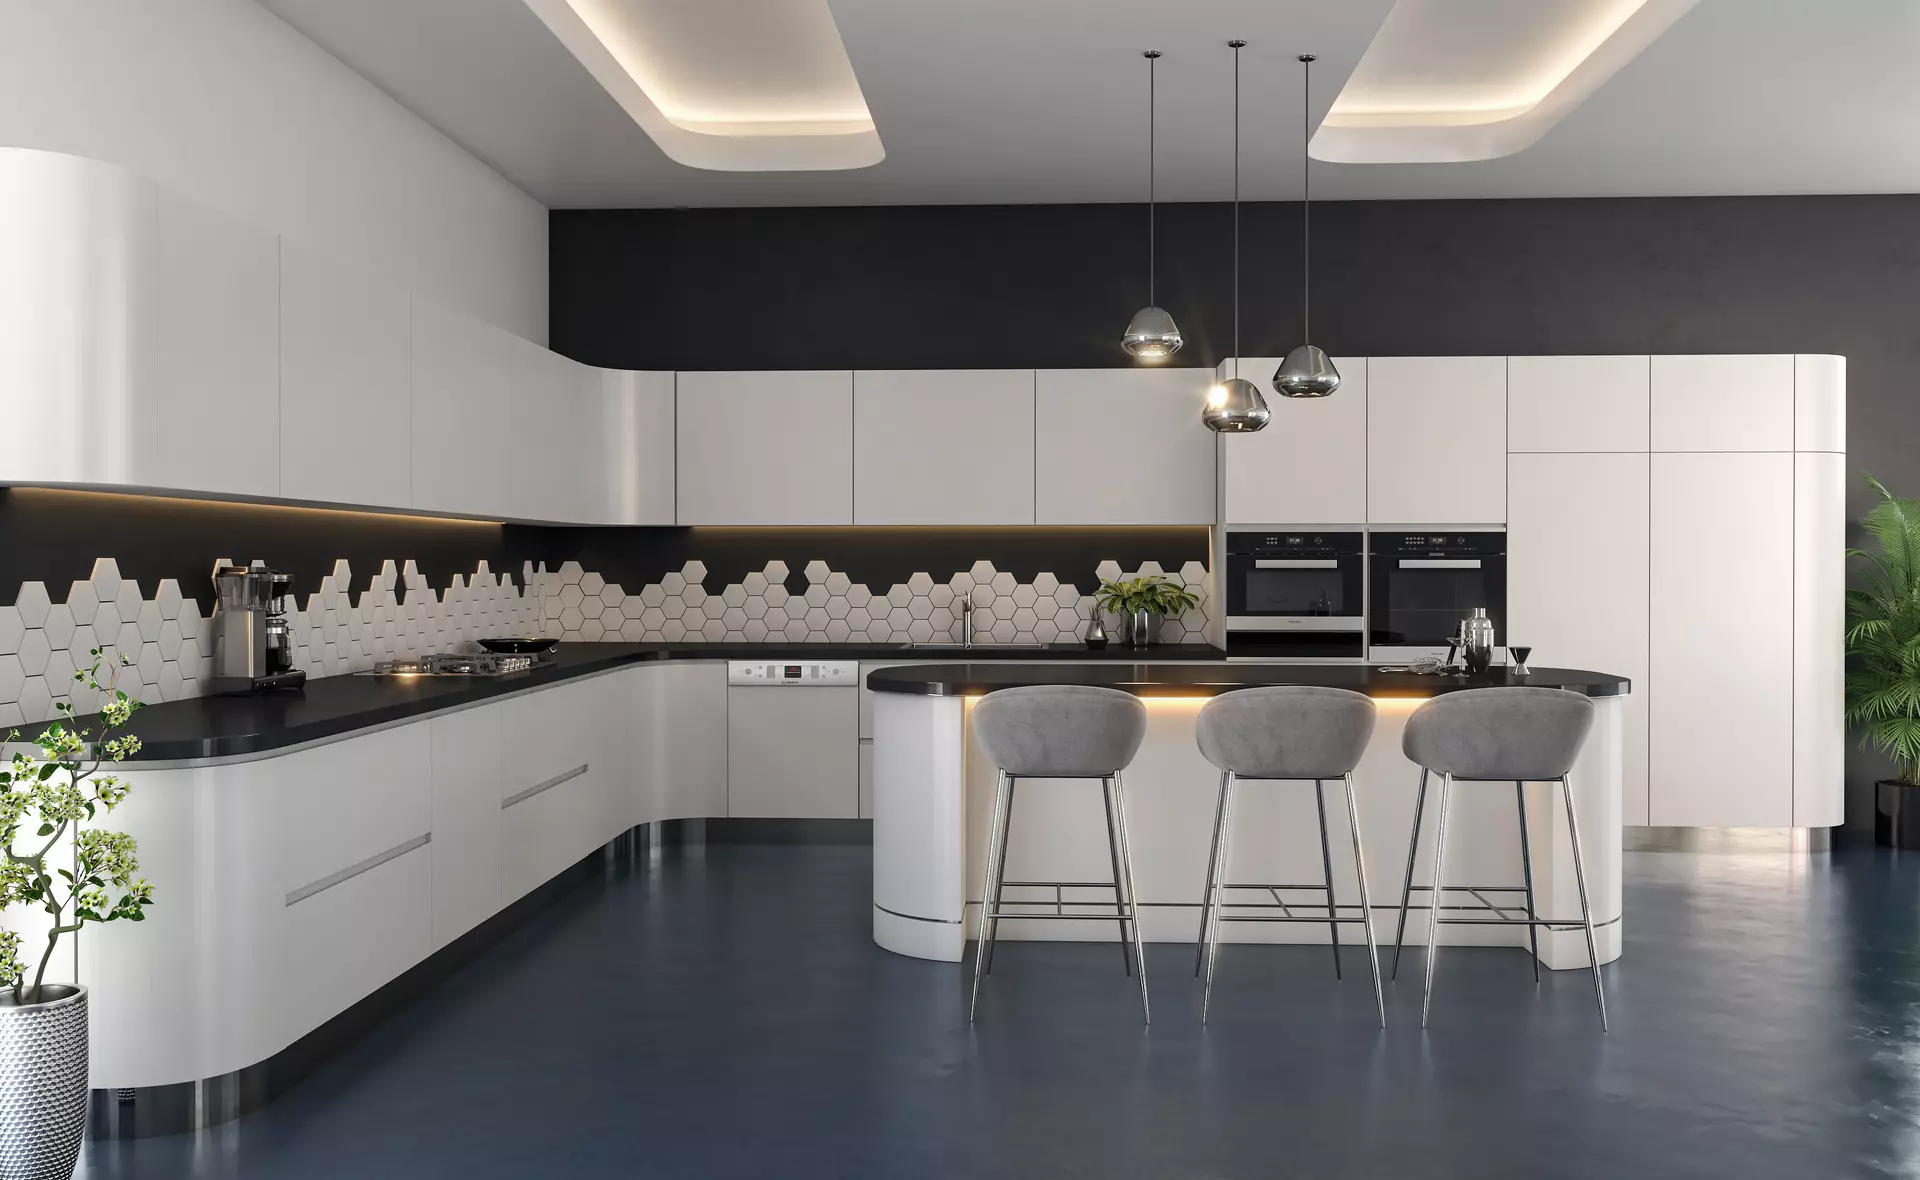 A black and white kitchen with bar stools.